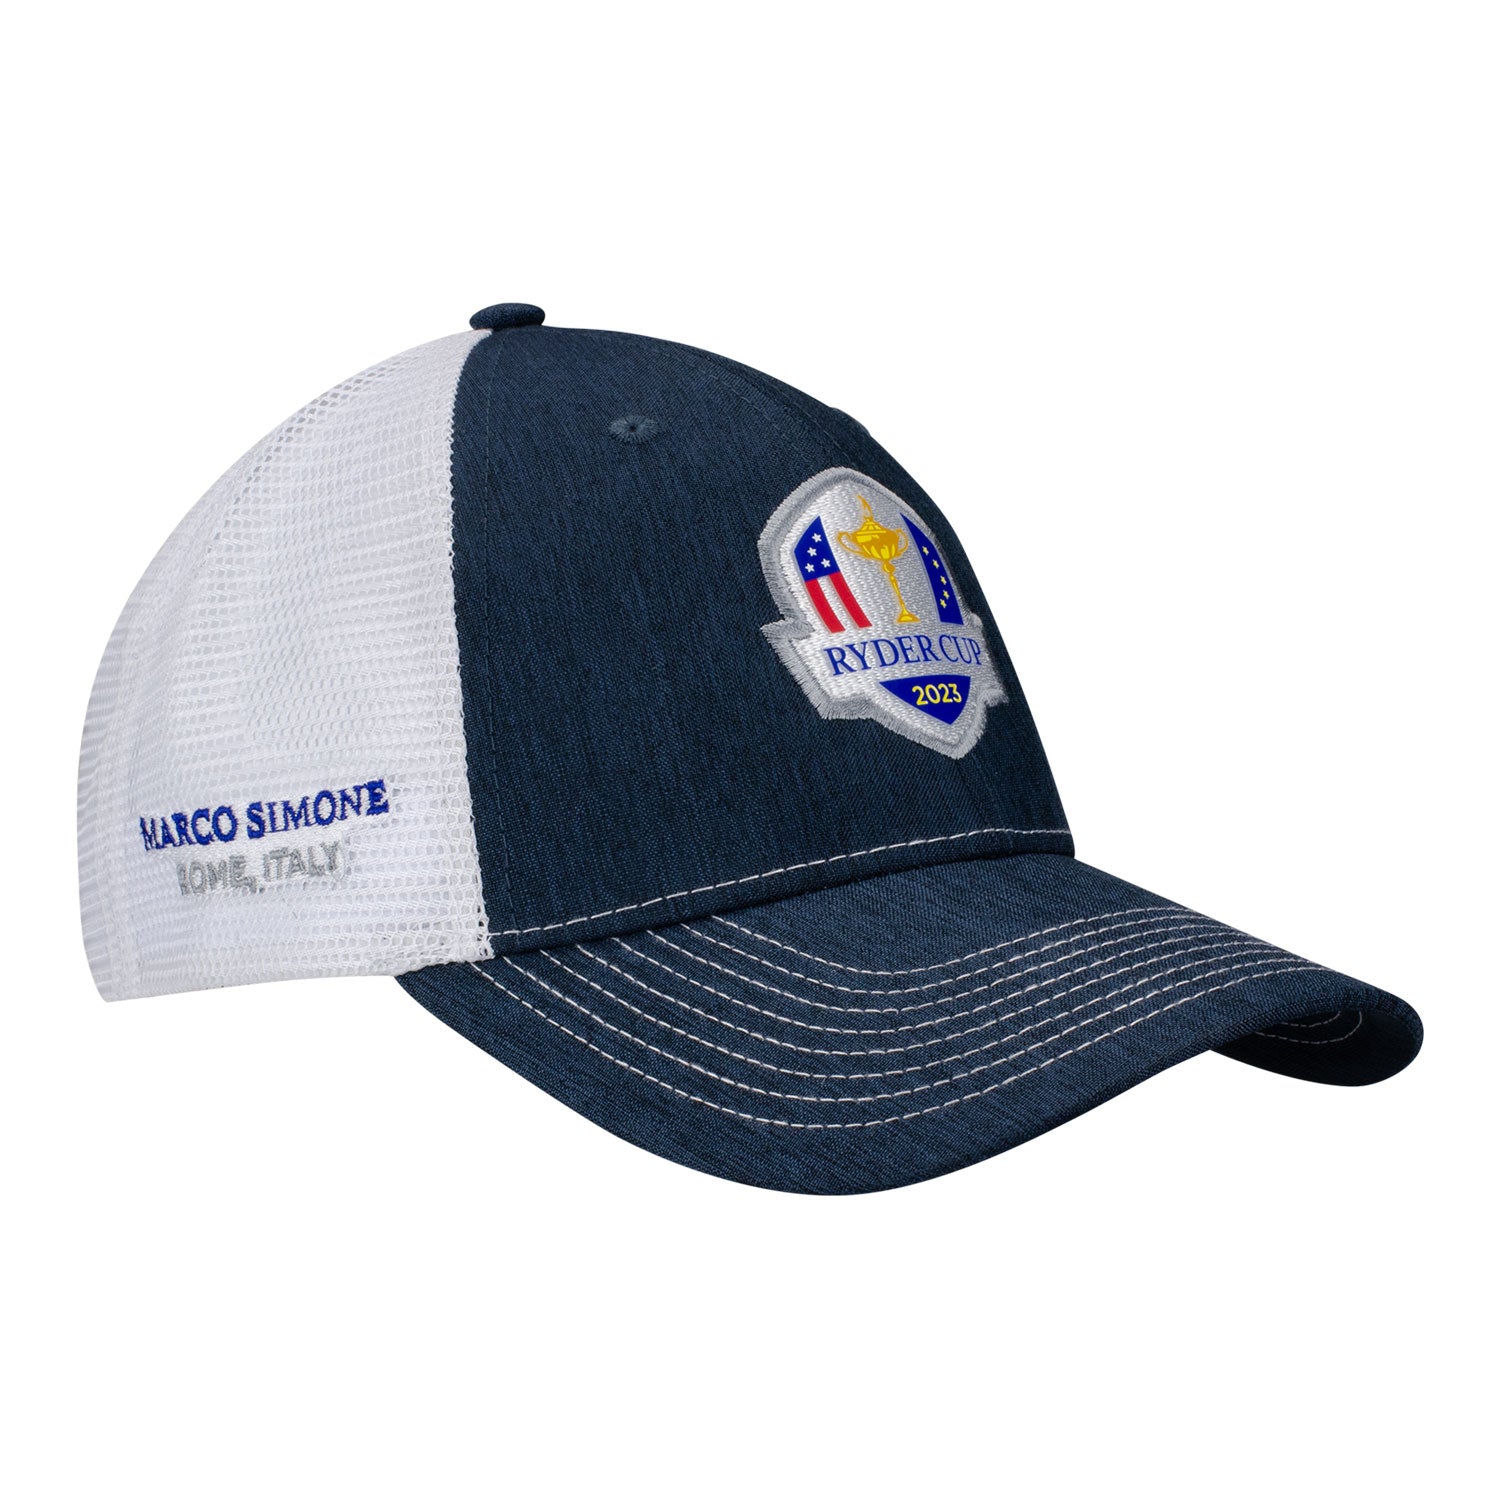 Ahead 2023 Ryder Cup Hat in Navy & White- Front View